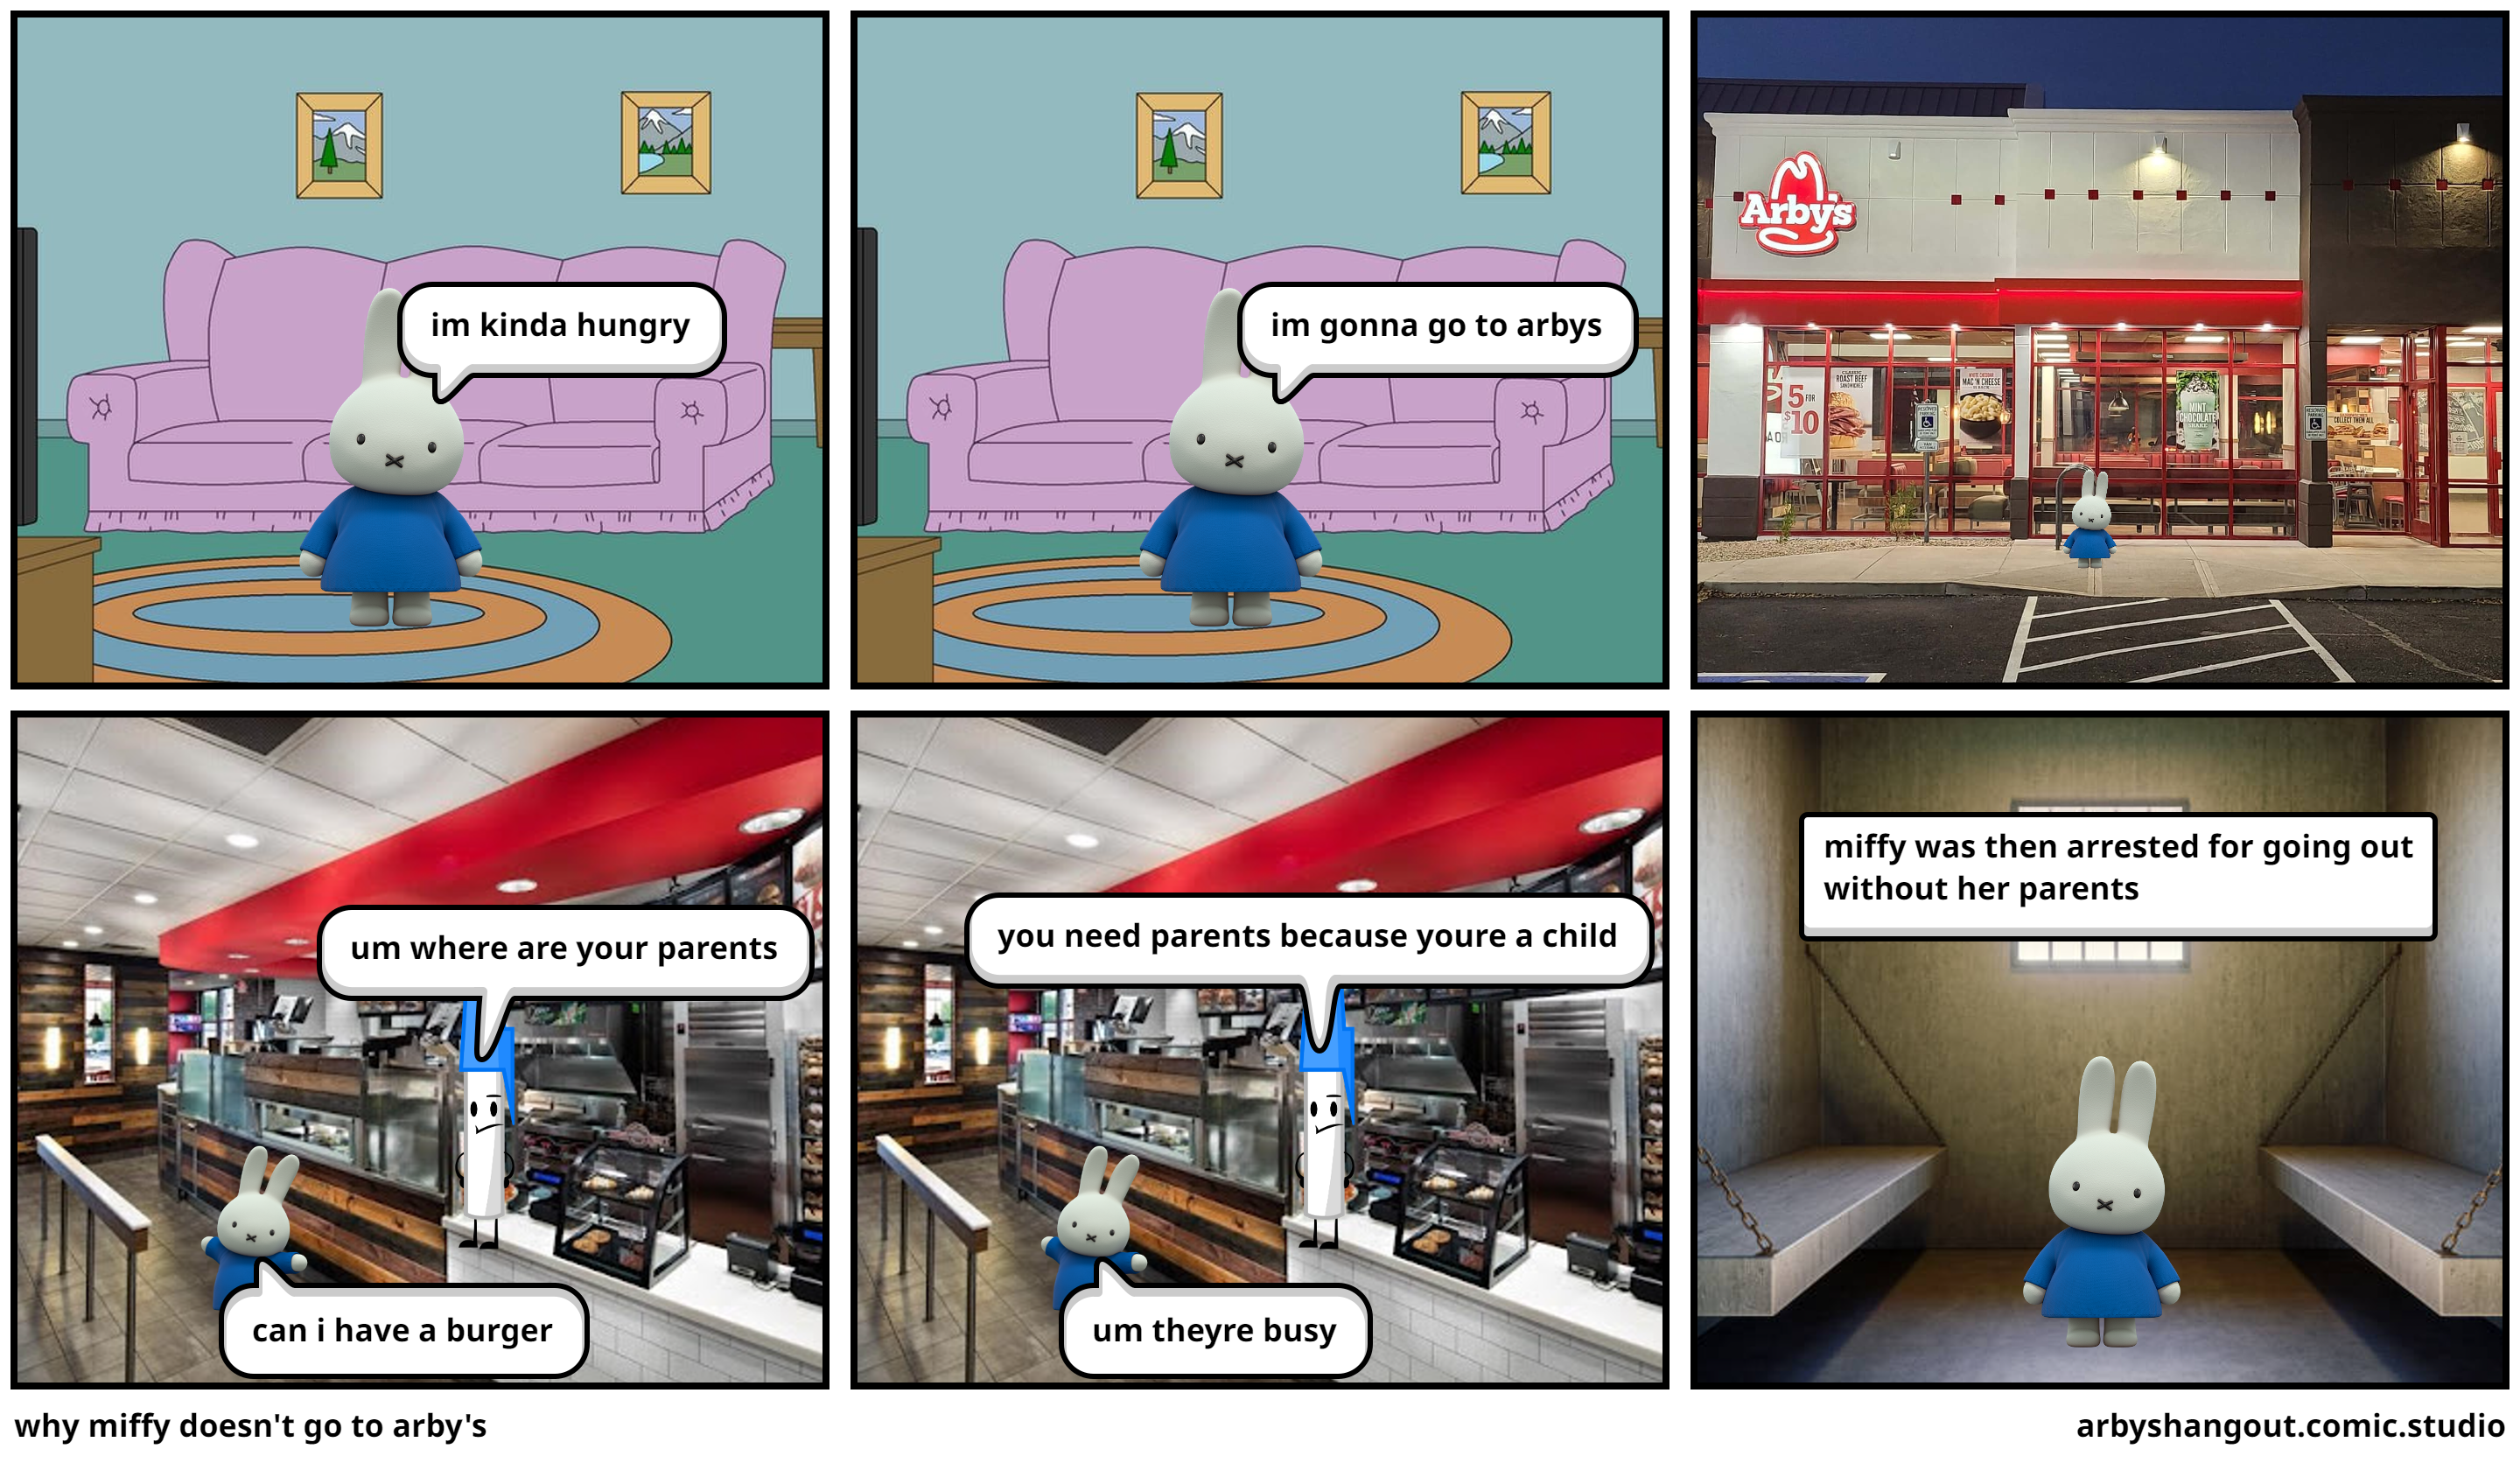 why miffy doesn't go to arby's